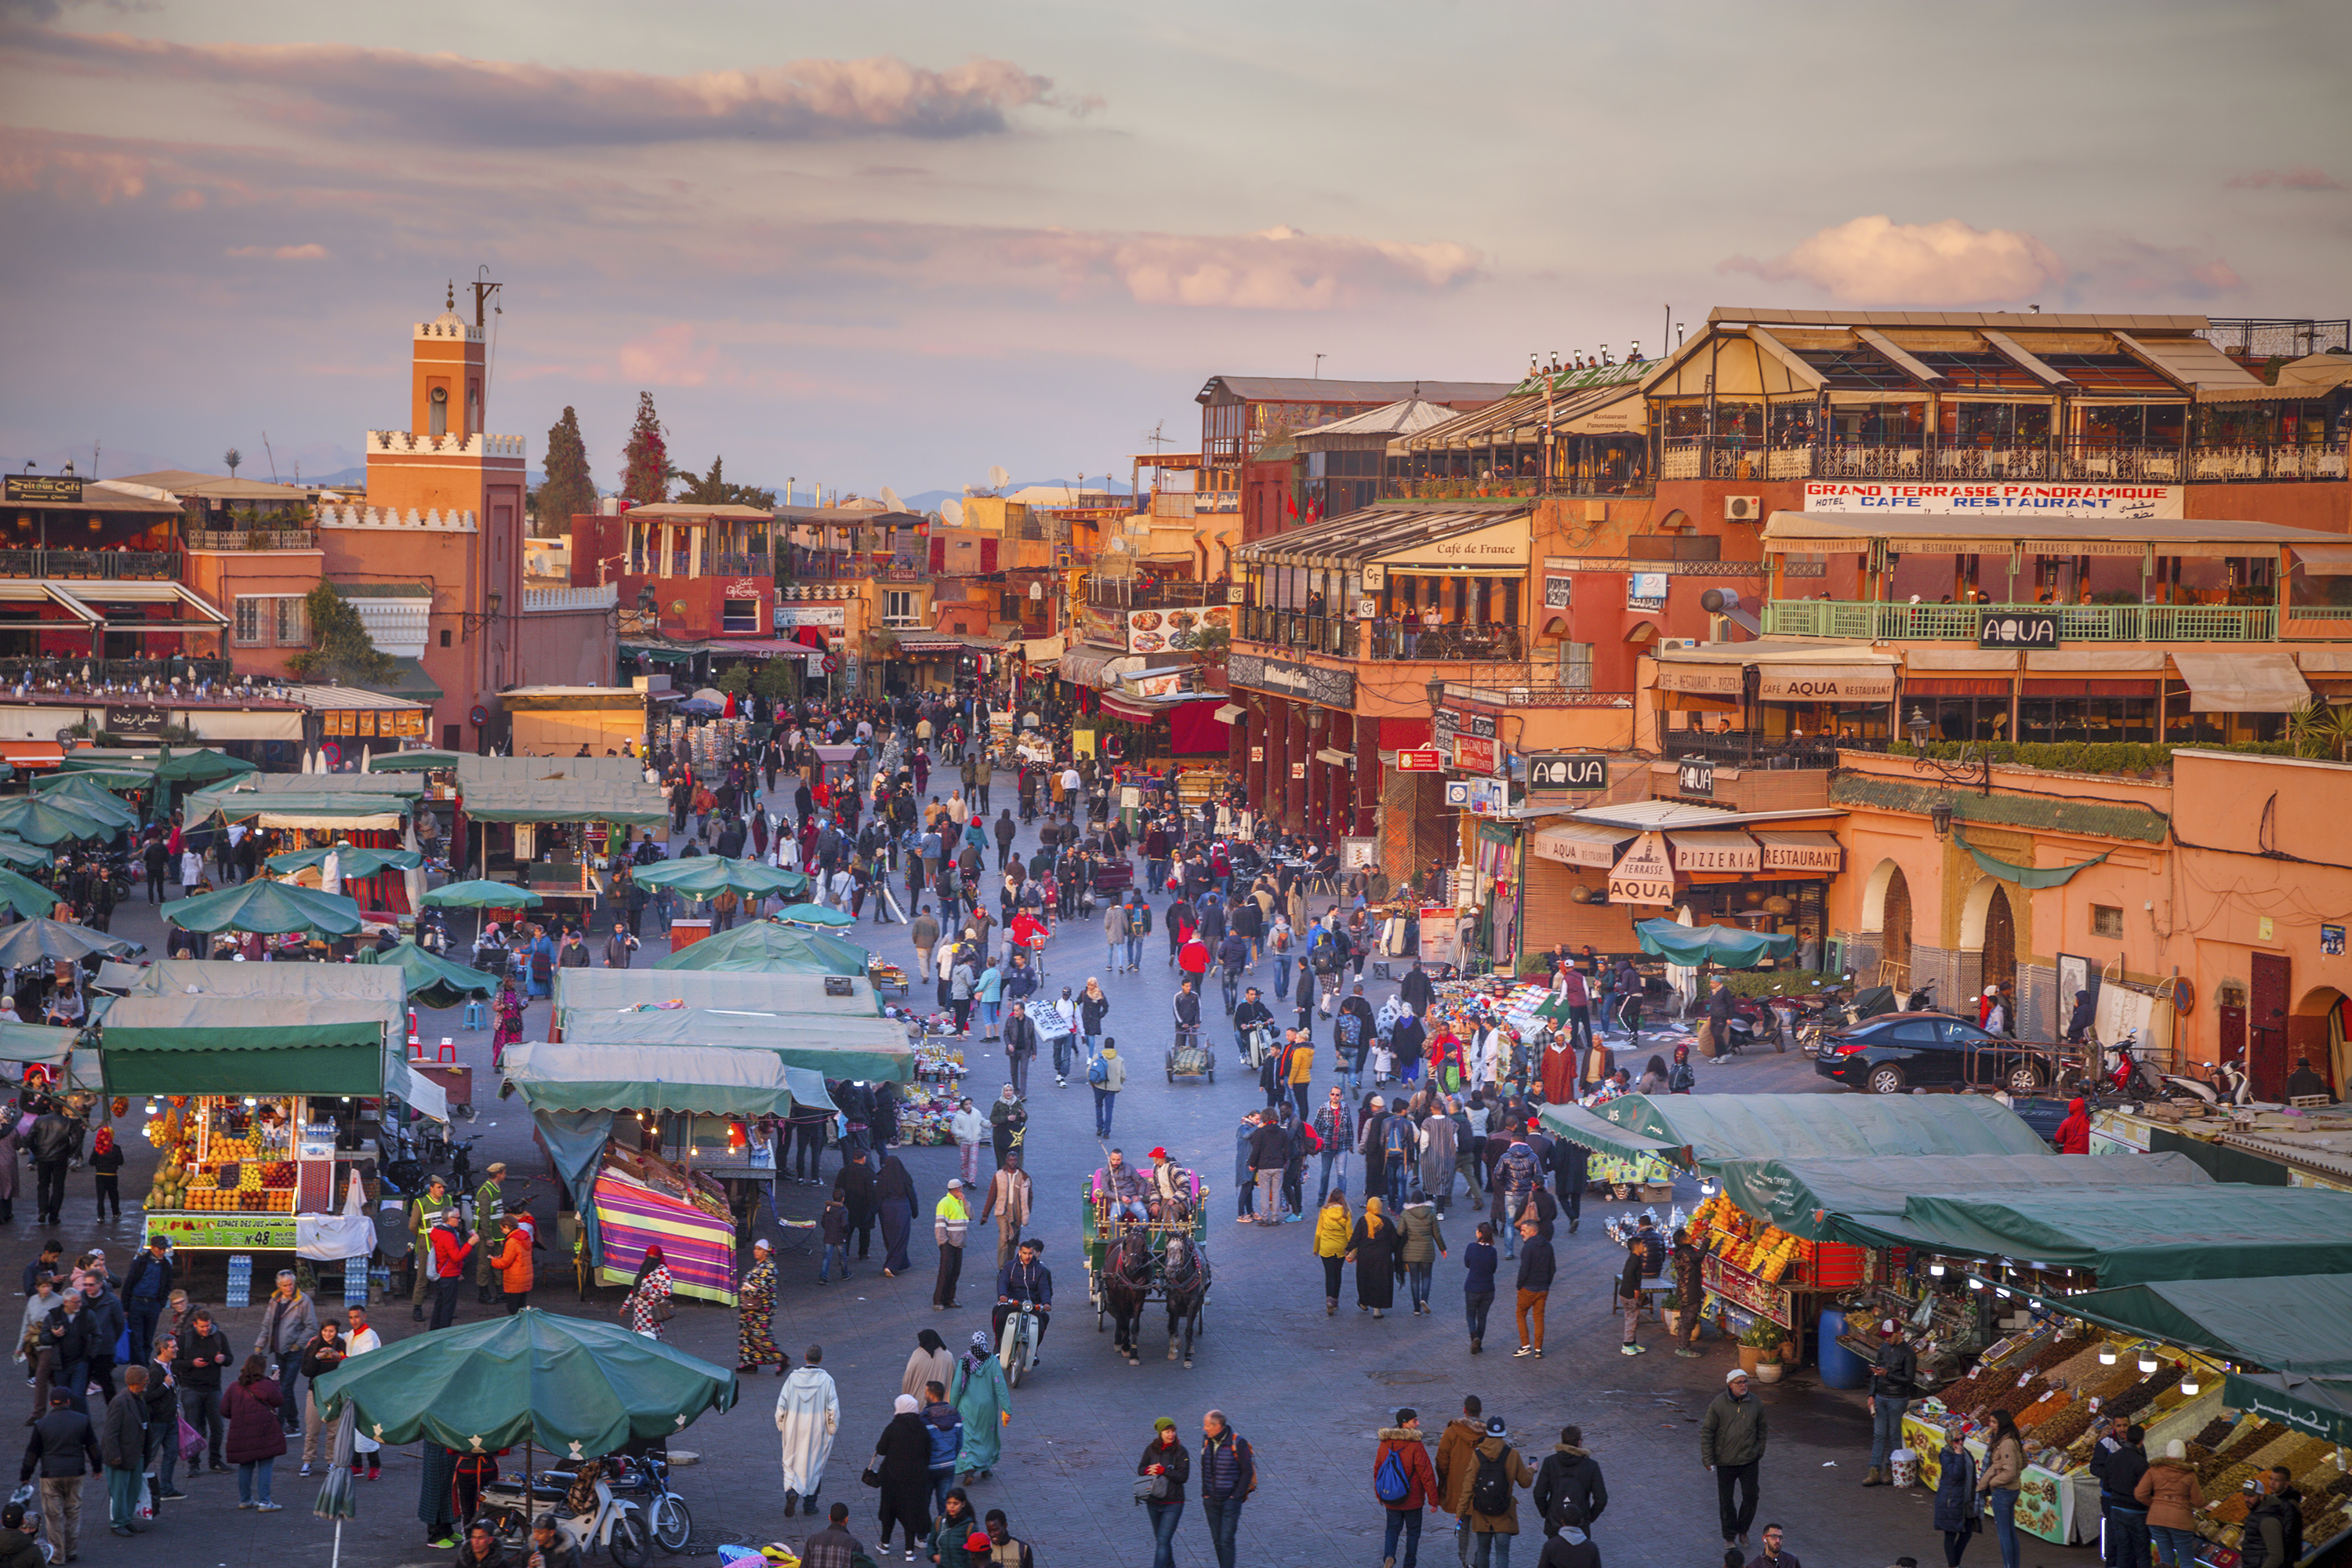 Jemaa el-Fnaa, a square and market place, in Marrakesh, Morocco.